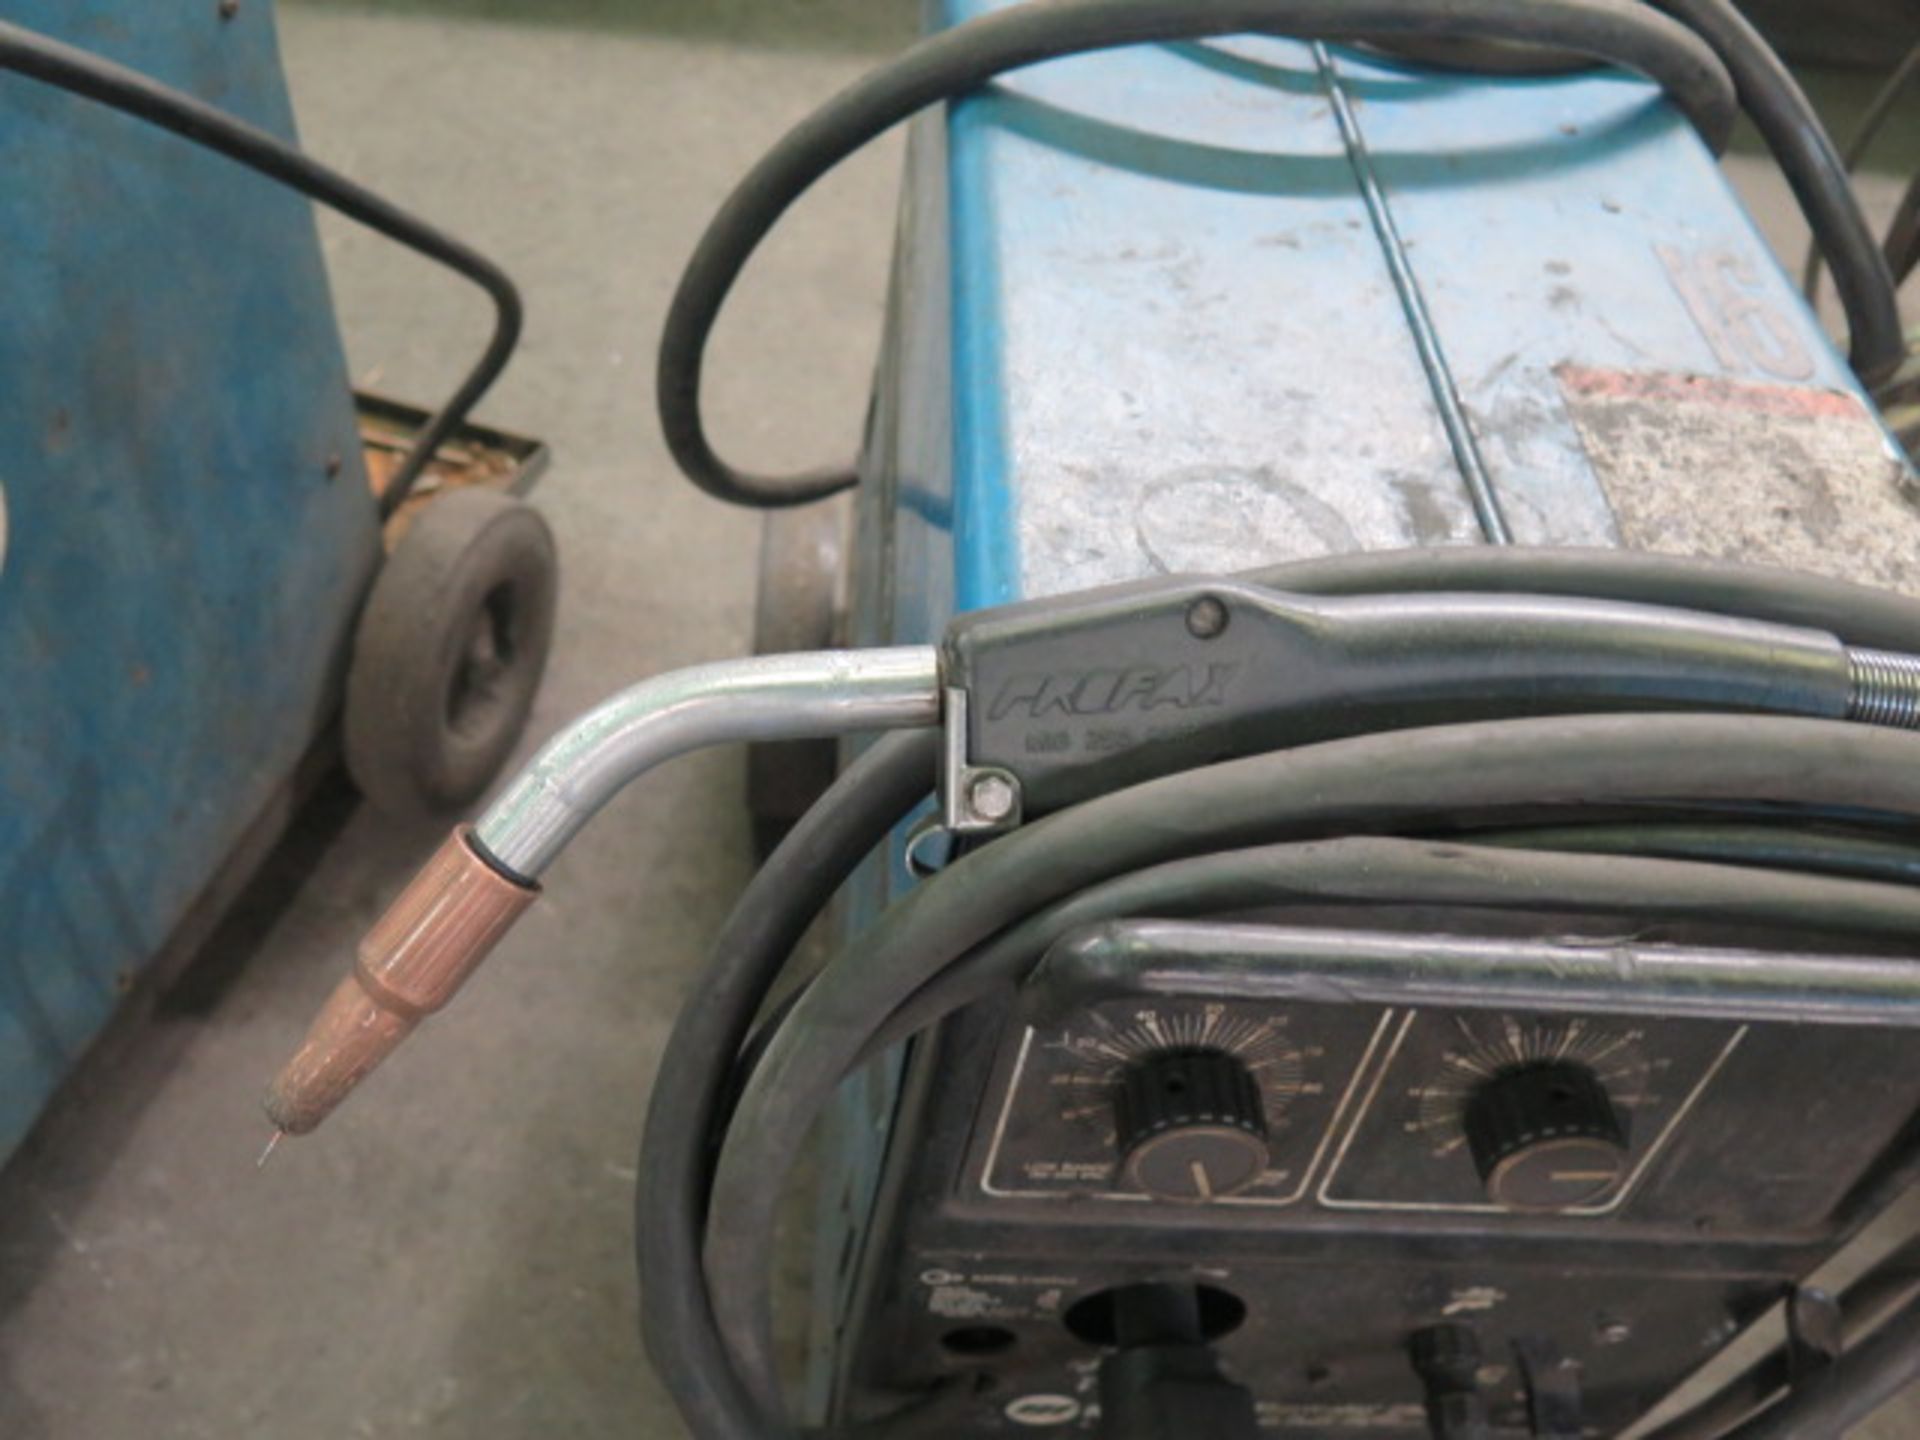 Miller Millermatic 250 CV-DC Arc welding Power Source and Wire Feeder (SOLD AS-IS - N0 WARRANTY) - Image 4 of 5